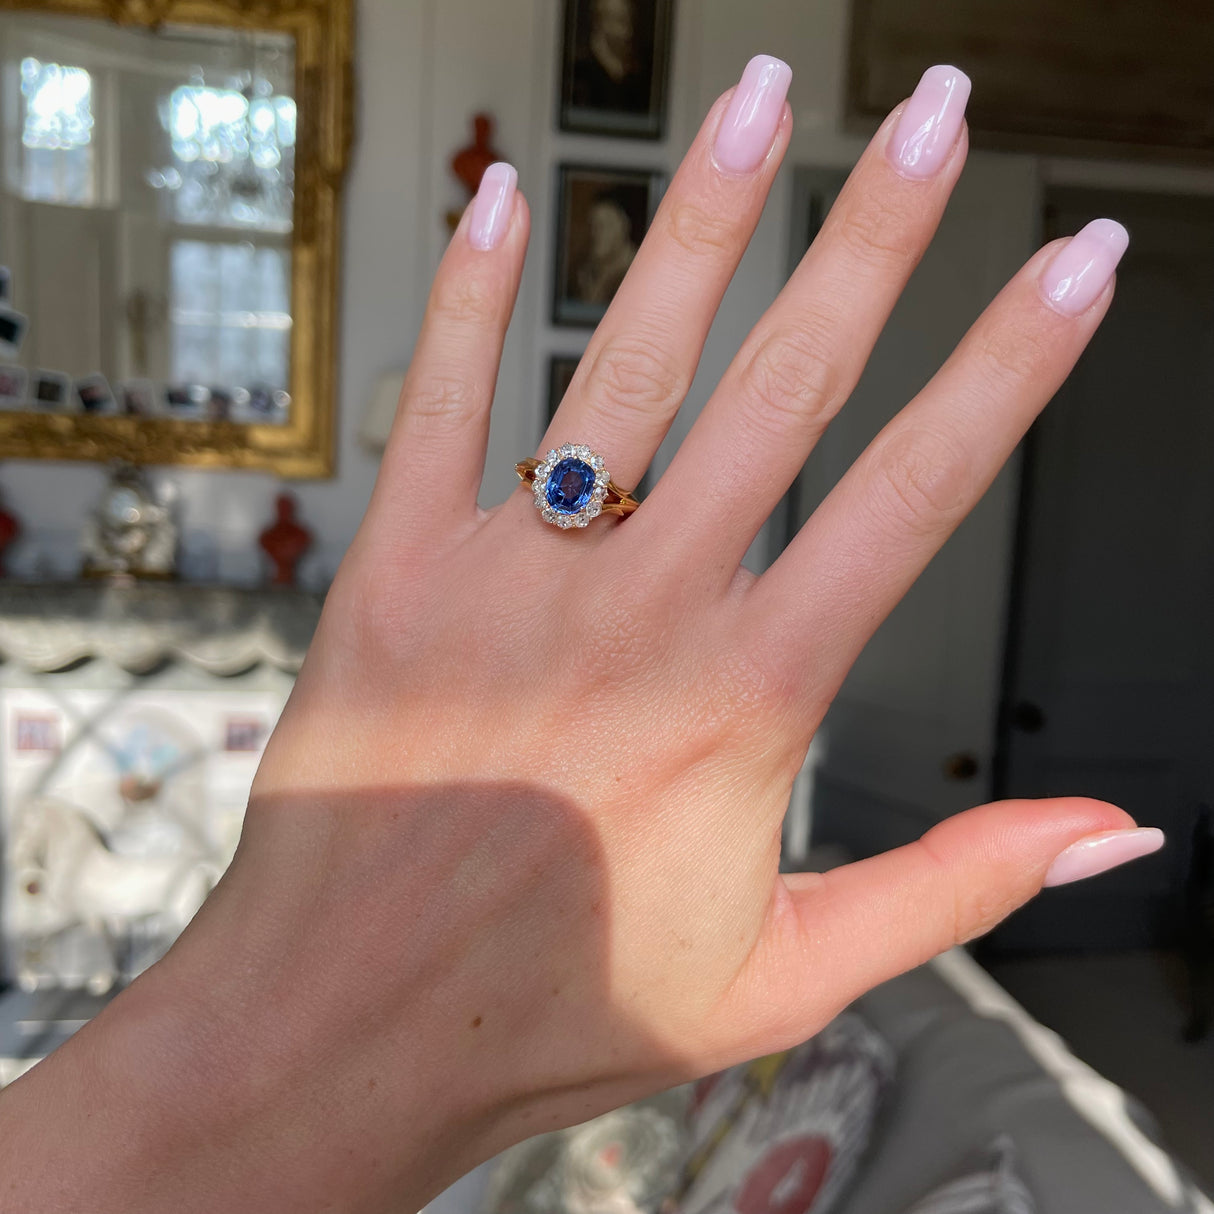 Victorian, sapphire and diamond cluster engagement ring, worn on hand.